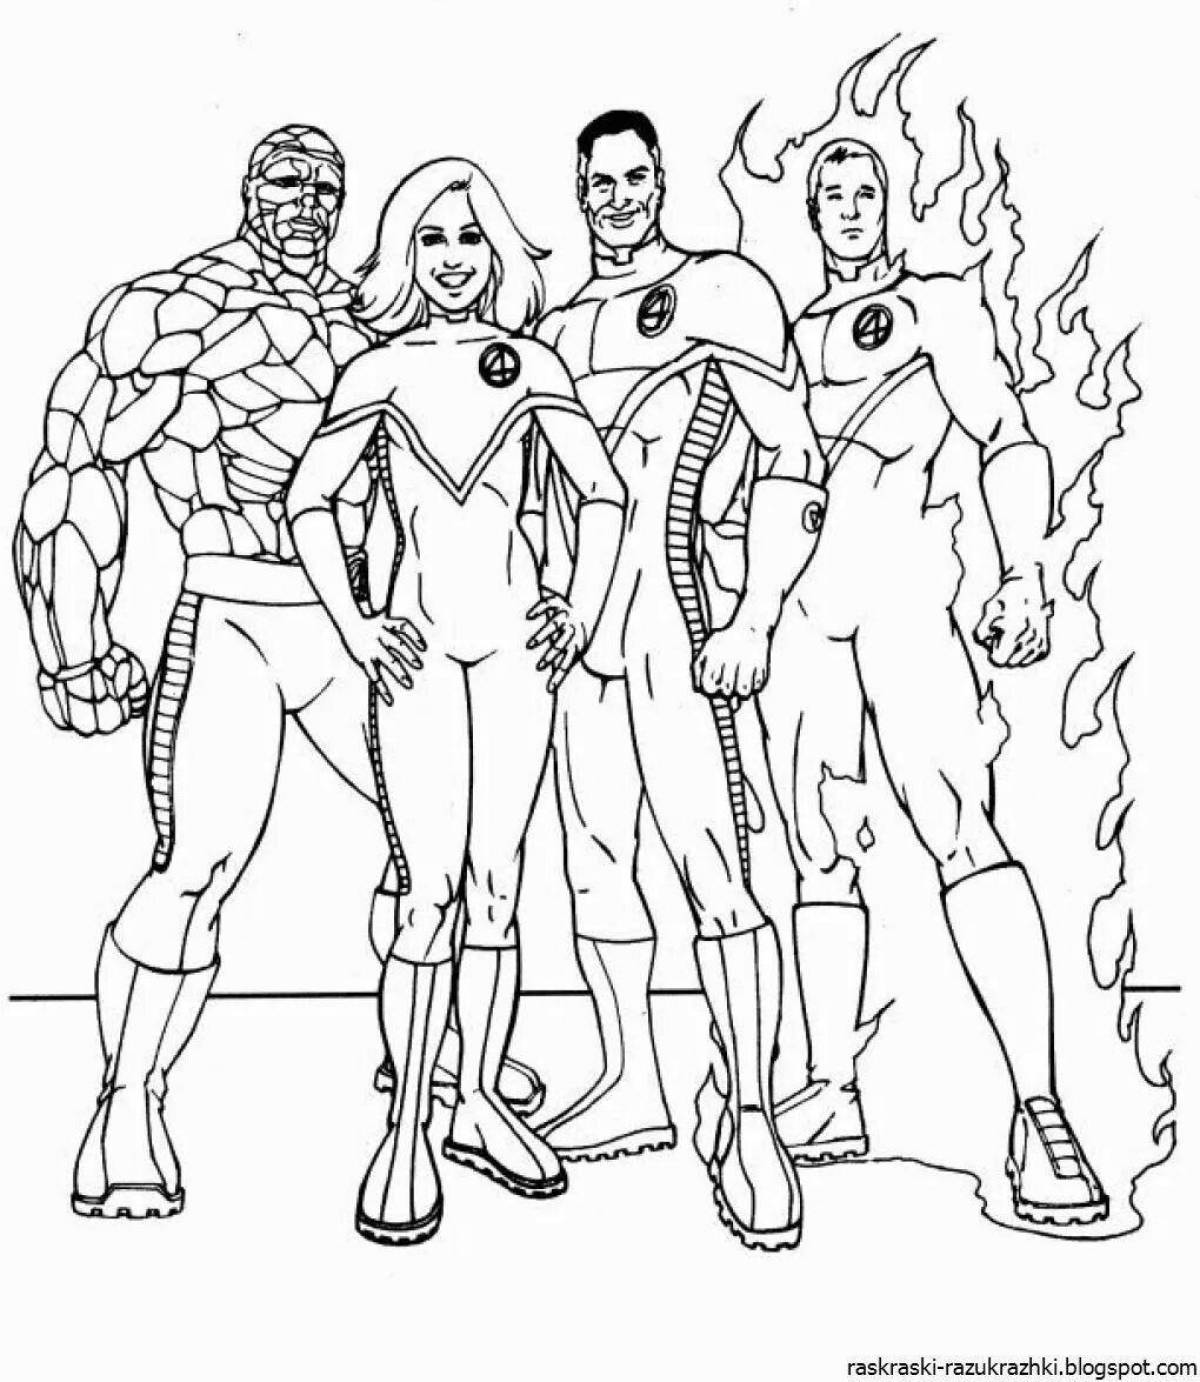 Radiant superhero coloring book for boys 5 years old